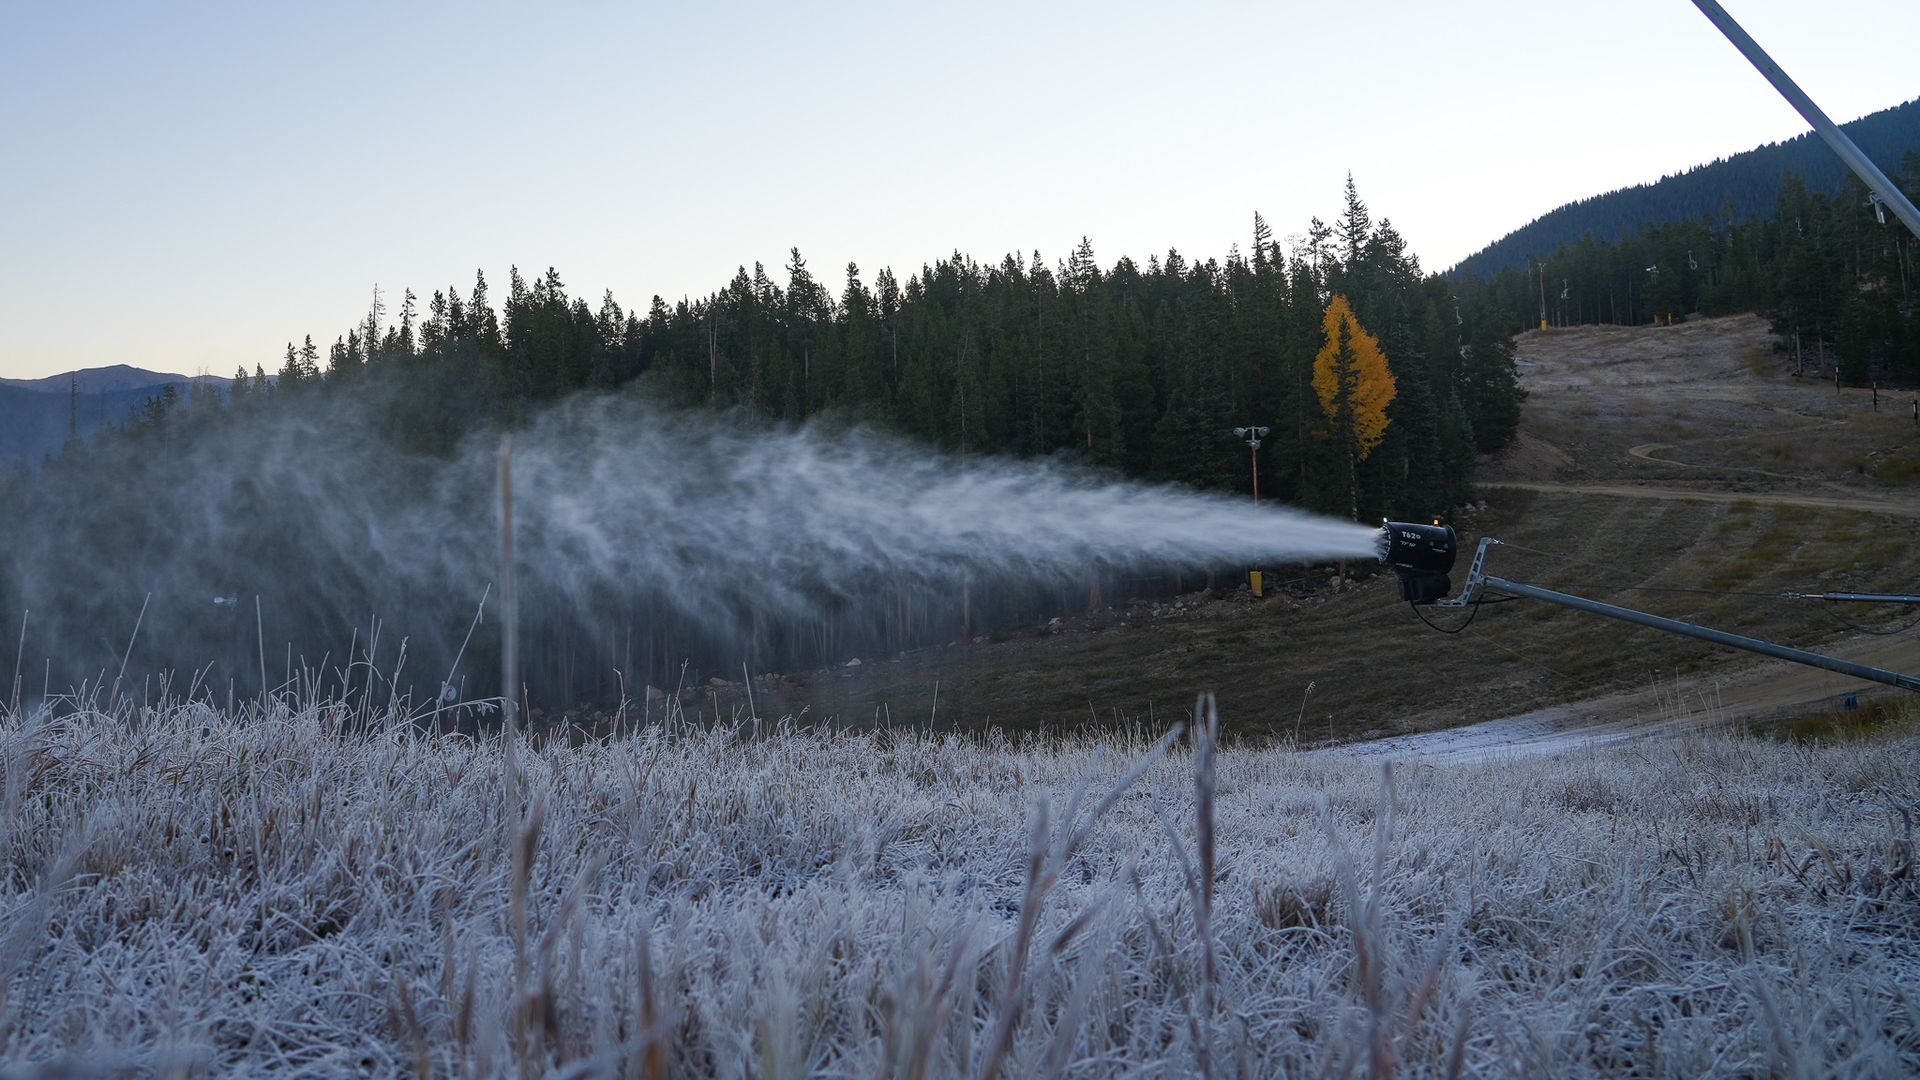 Snowmaking at Keystone on Oct. 9. Photo courtesy of Katie Young at Keystone Resort